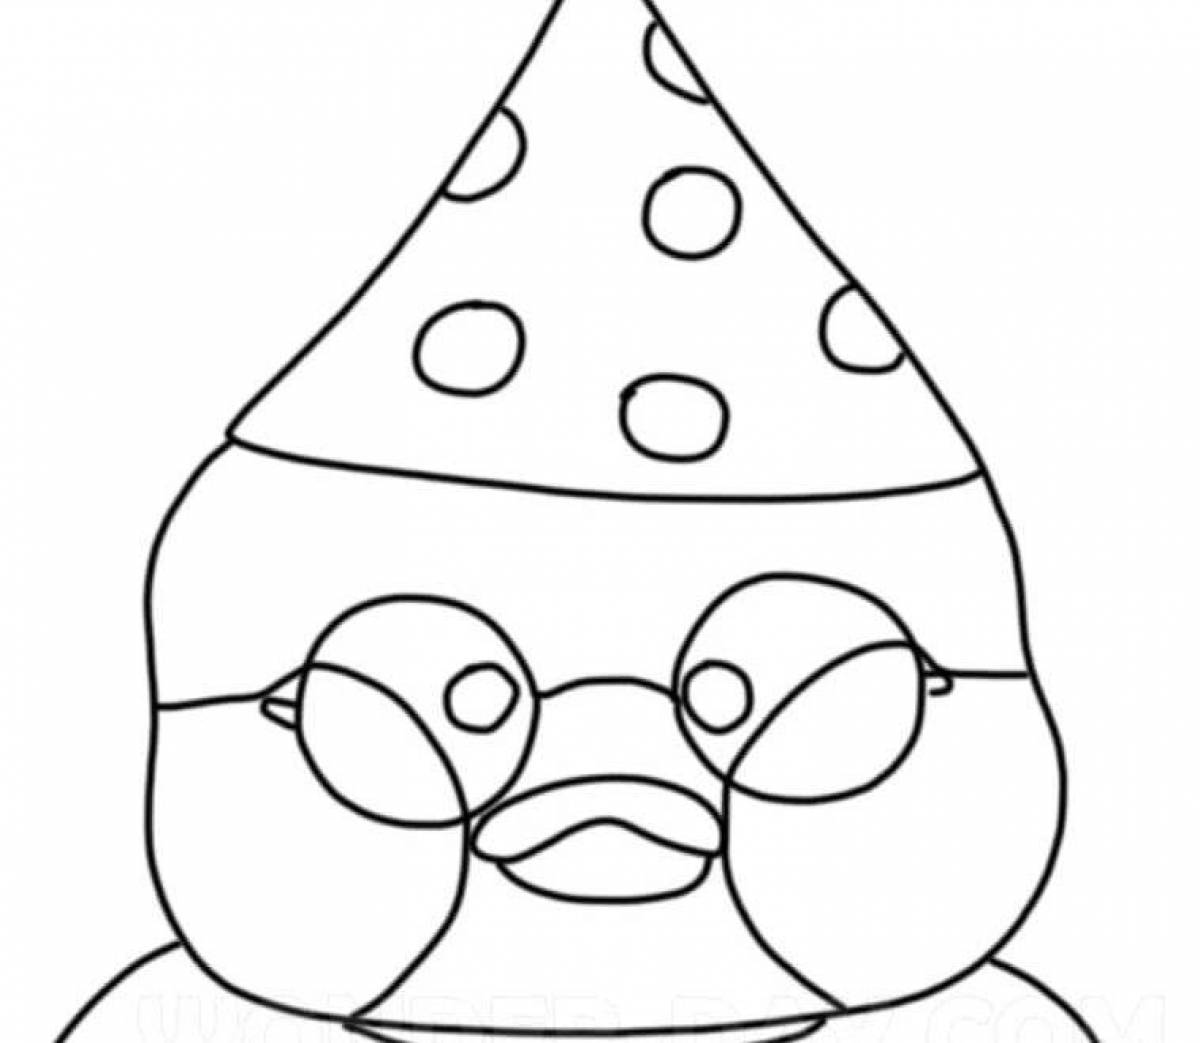 Jovial lalaphan duck coloring page